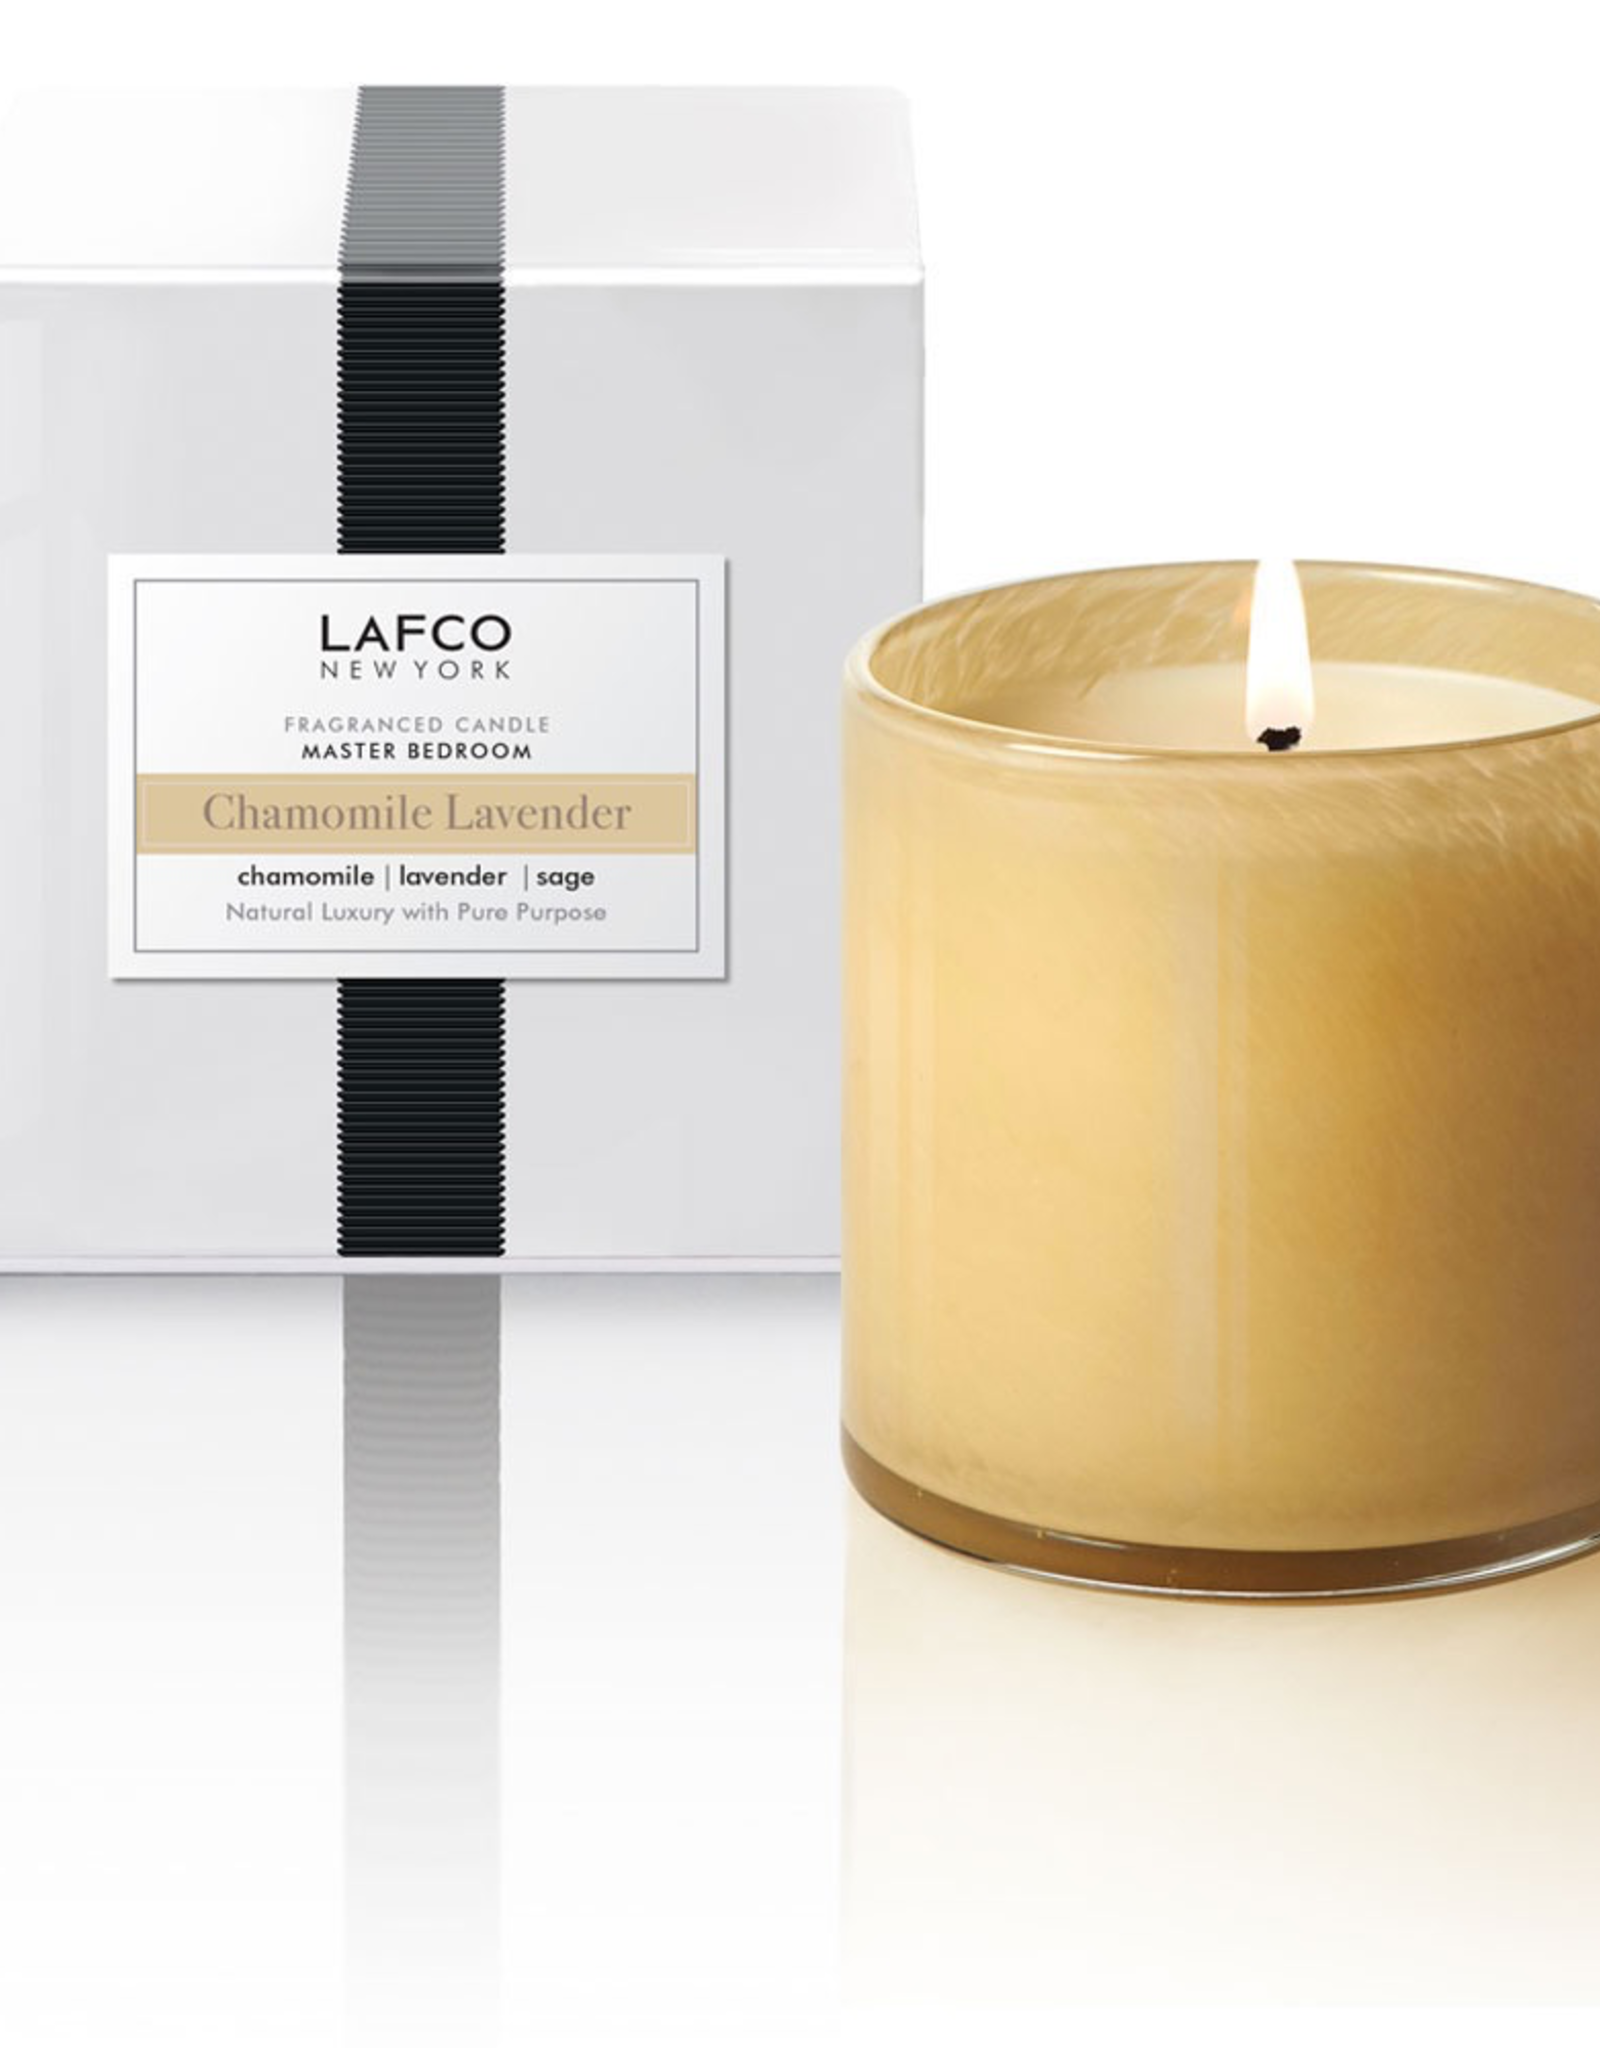 Chamomile Lavender Bedroom Lafco Candle